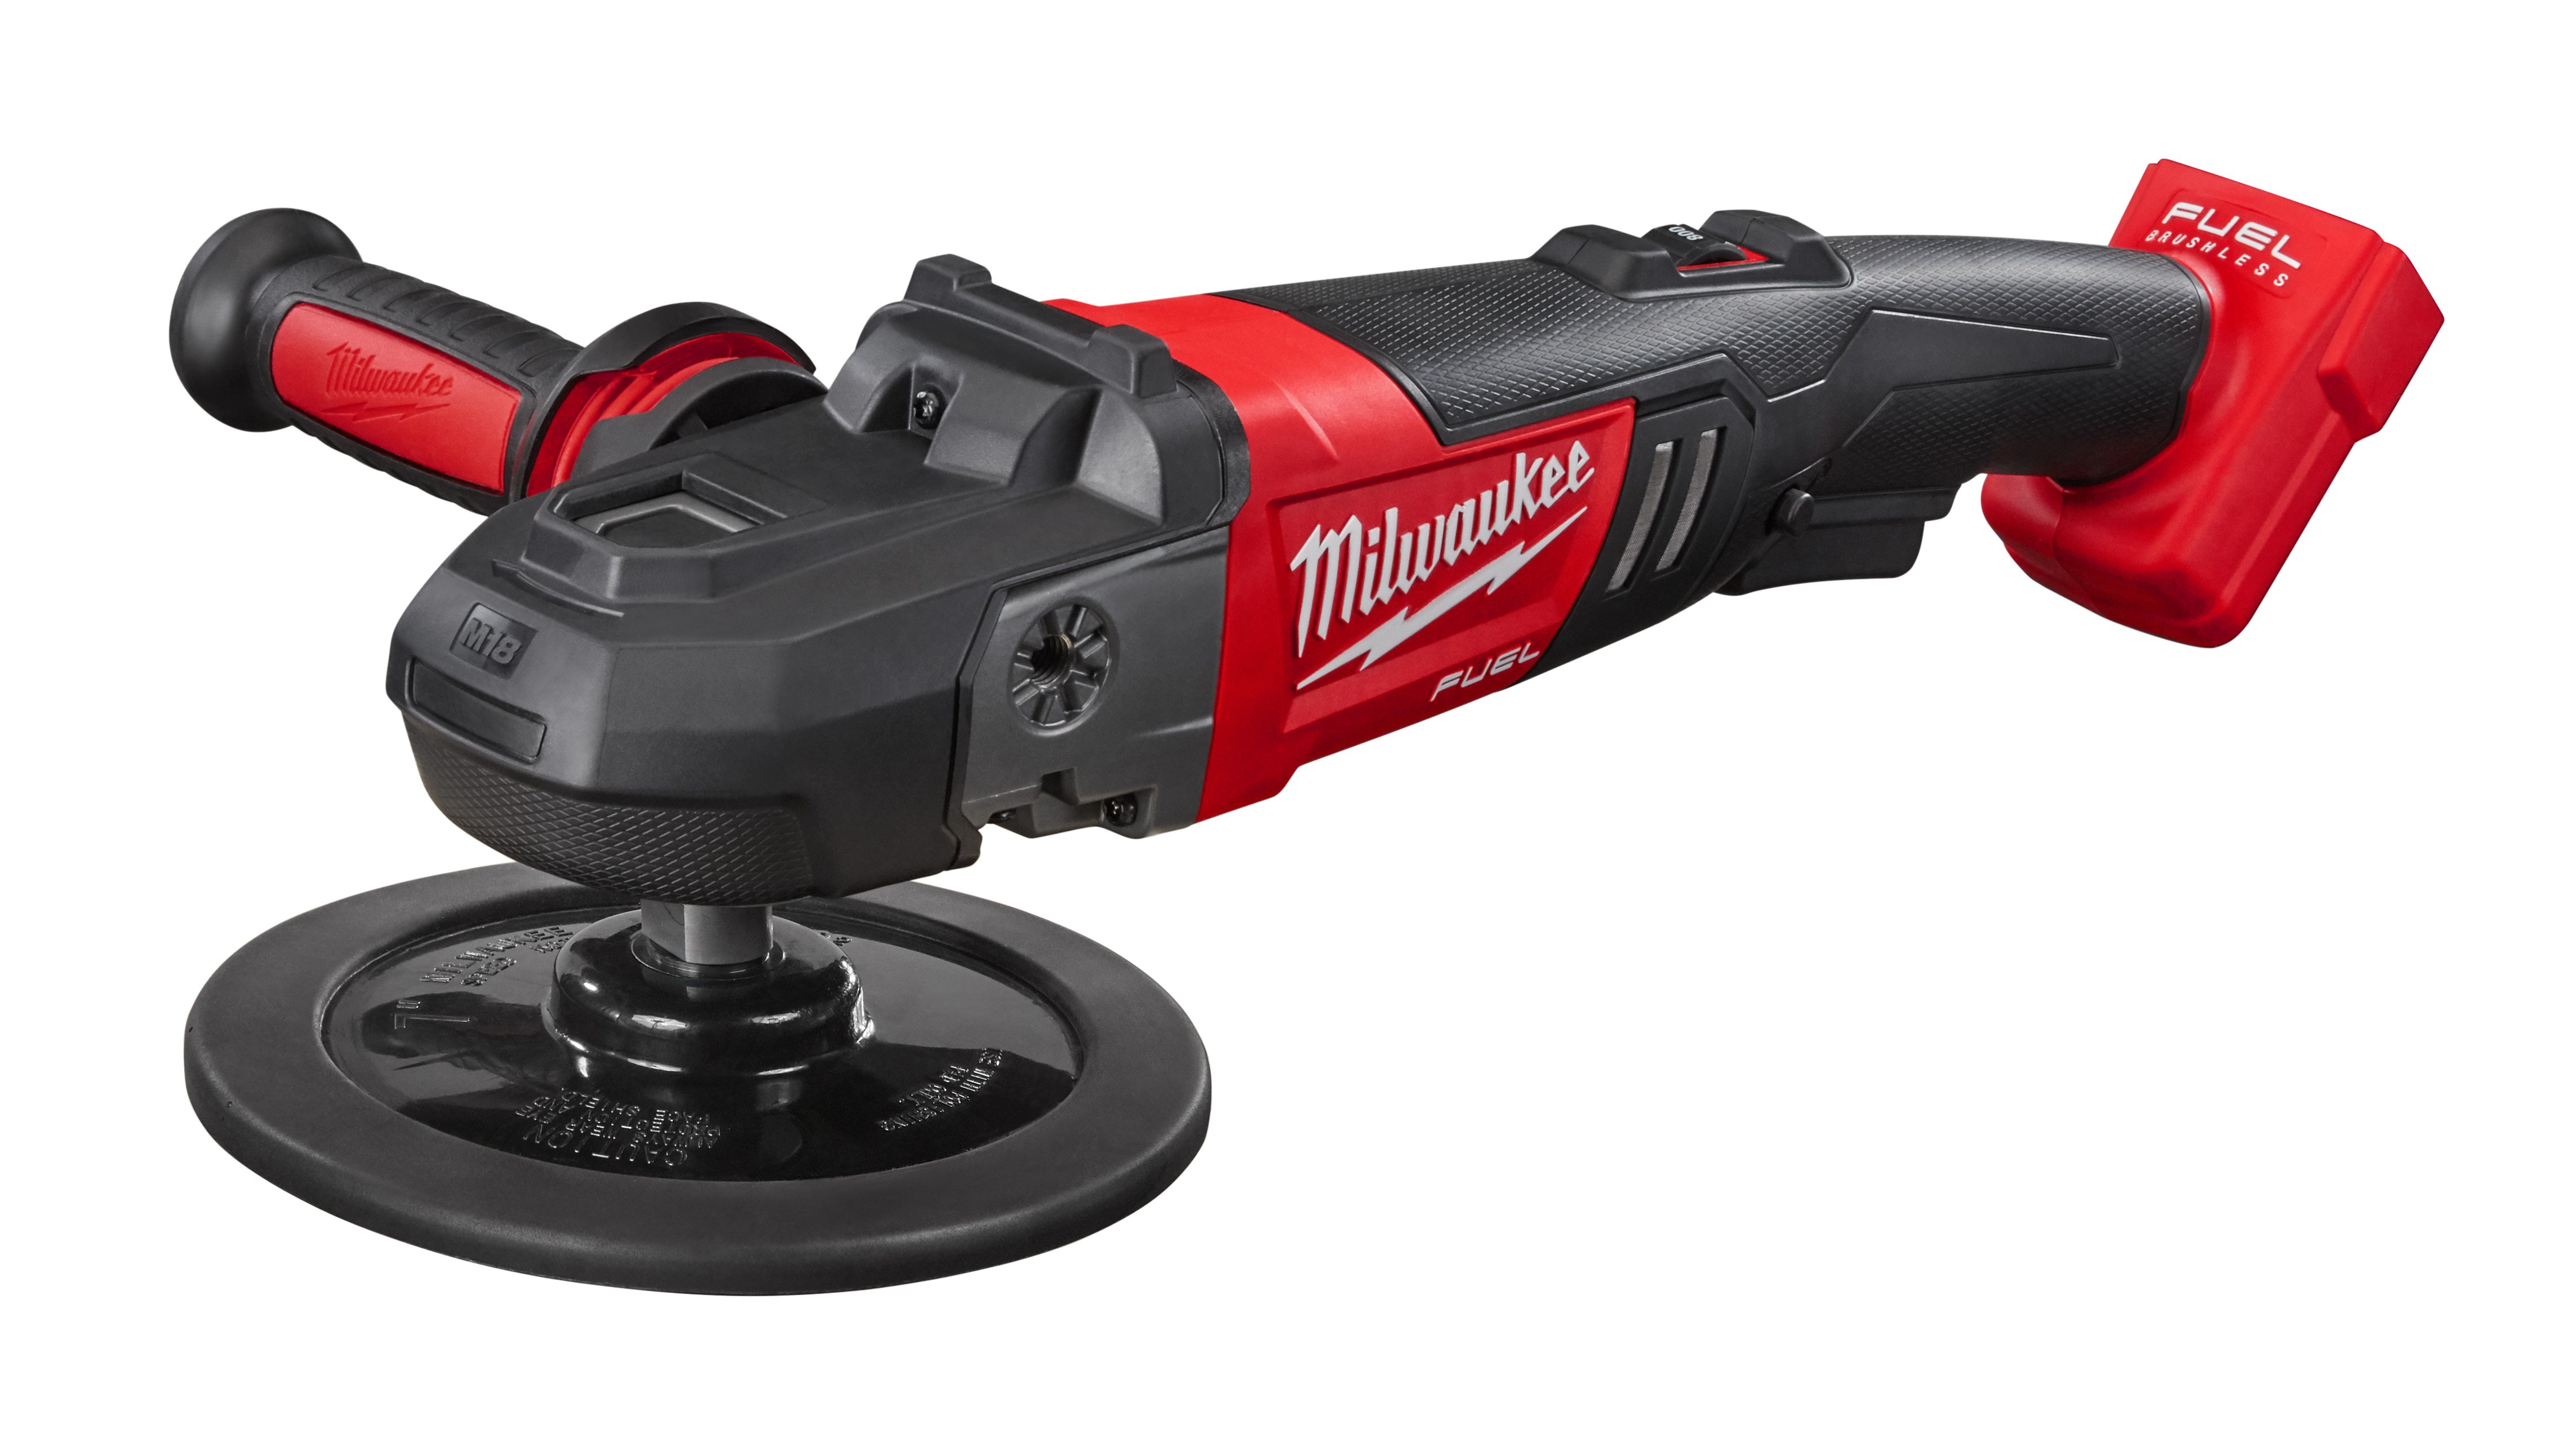 The M18 FUEL™ 7 in. variable speed polisher is the world’s first cordless full-size rotary polisher. By harnessing the power, performance and run-time of M18 FUEL™ technology, this tool delivers corded performance that allows users to power through the most demanding applications. At more than 1 lb lighter than corded, and the ability to deliver total control through a variable speed dial and trigger, the new M18 FUEL™ polisher frees users from the extra work, distractions, paint damage, and inconvenience caused by cords. Paired with M18 XC5.0 batteries, the M18 FUEL™ polisher can complete a full size car on one charge when working on moderate to good paint. The M18 FUEL™ polisher is equipped with a rubber over mold front housing to protect the paint from scratches in use as well as a removable dust cover to protect the motor and electronics from wool fibers and residue. The new tool is designed to distribute more of its weight over the pad, providing natural pressure on the surface area and more comfort to the user while polishing.